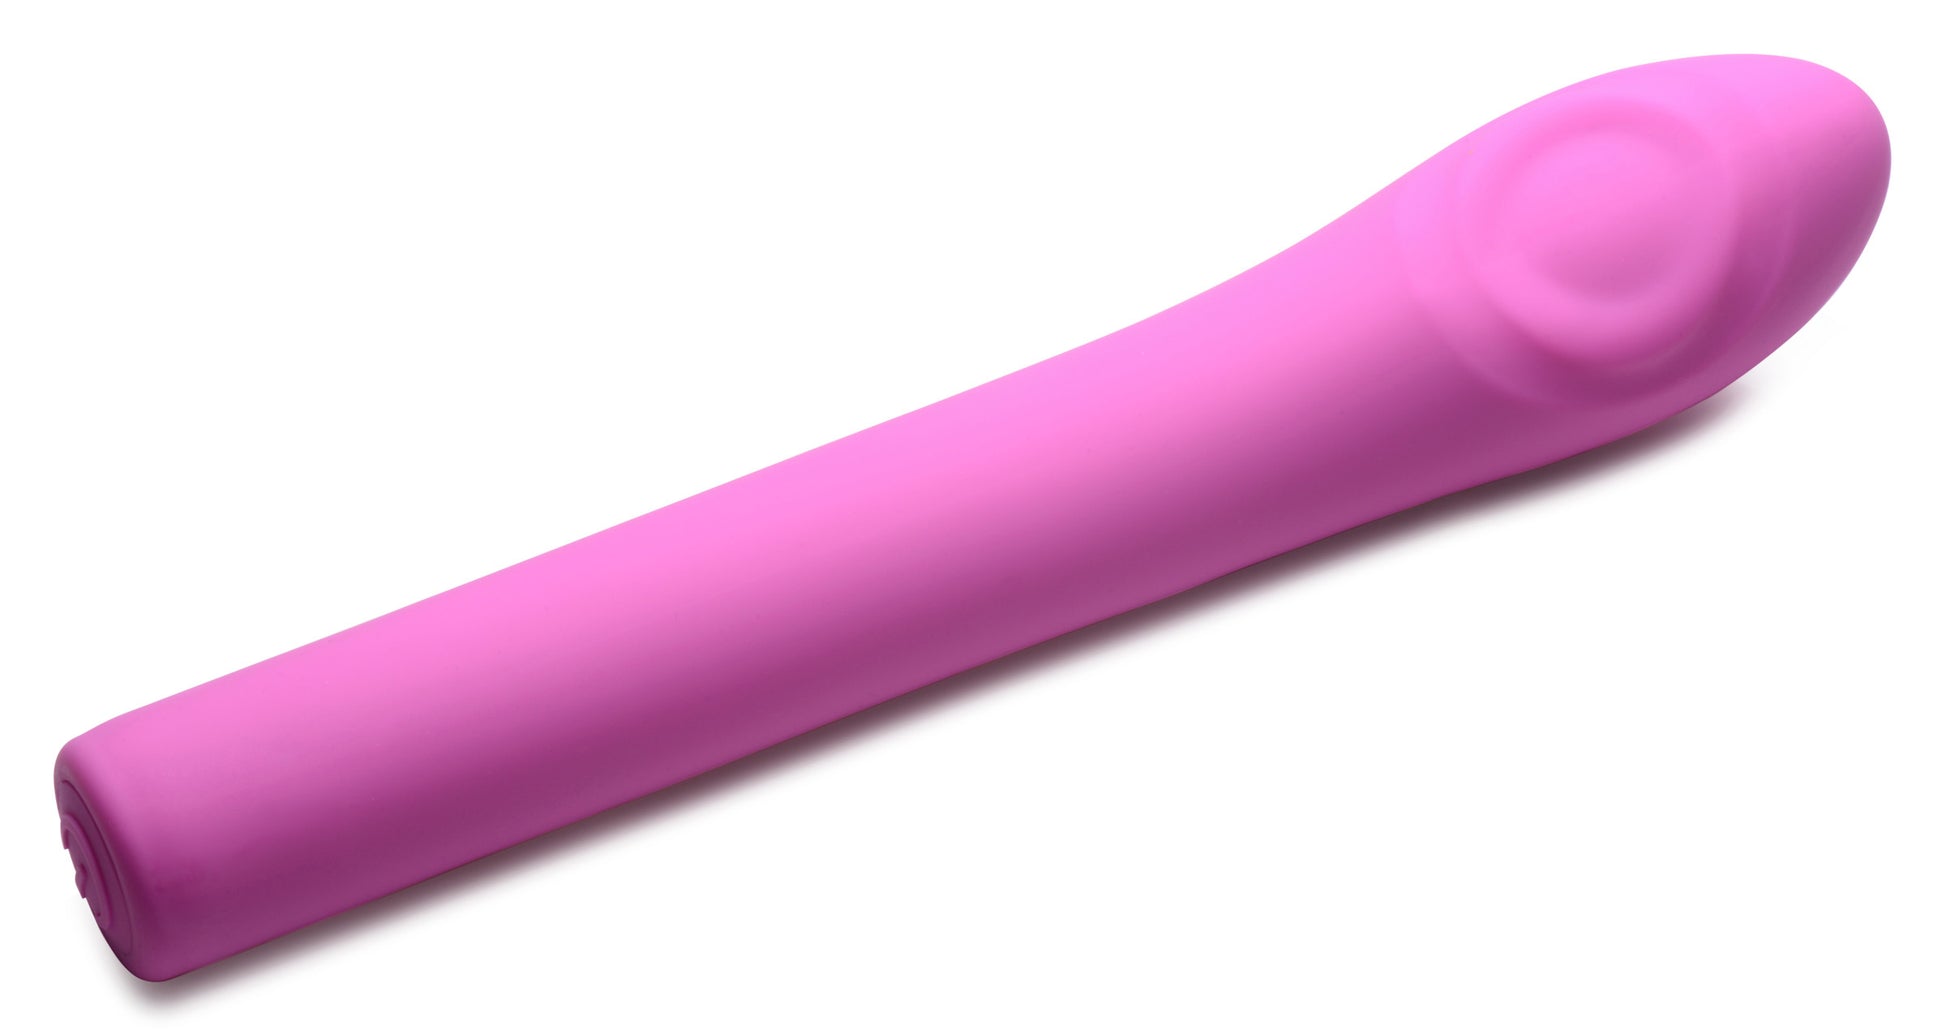 5 Star 9x Pulsing G-Spot Silicone Vibrator - Pink INM-AG600-PINK